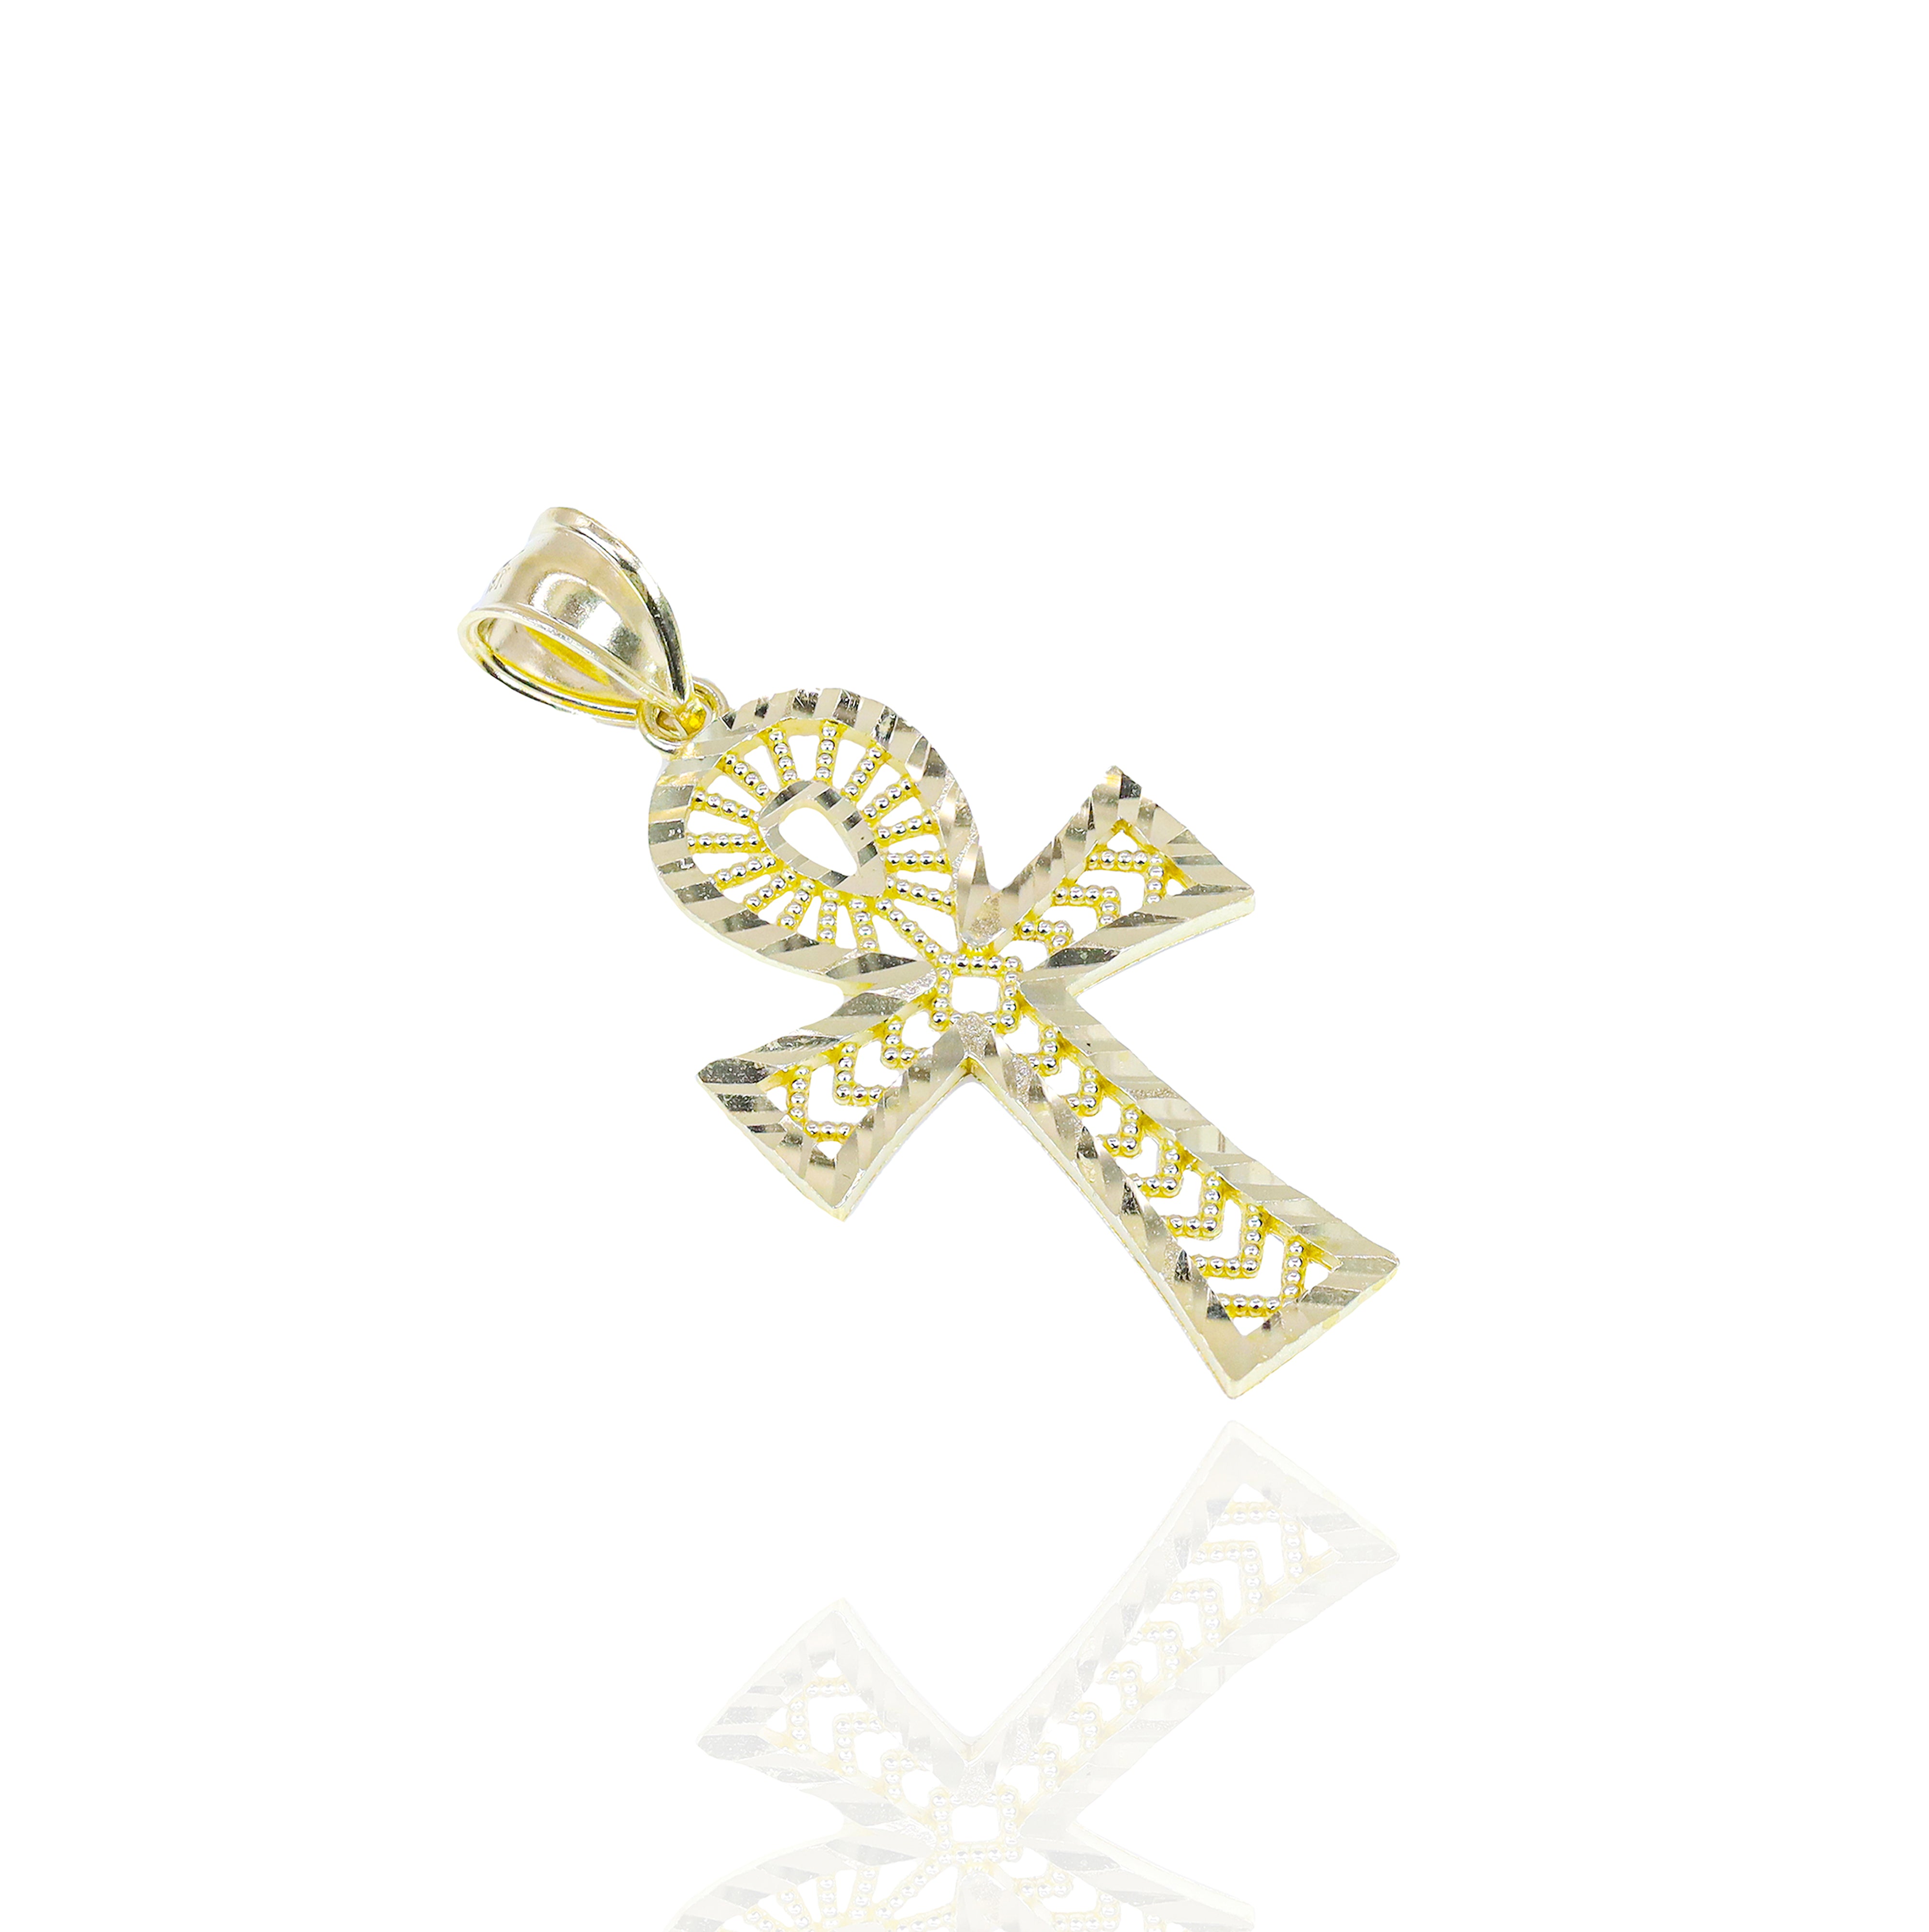 10KT Yellow Gold Fluted Ankh Pendant with Pattern Solid Gold Pendant